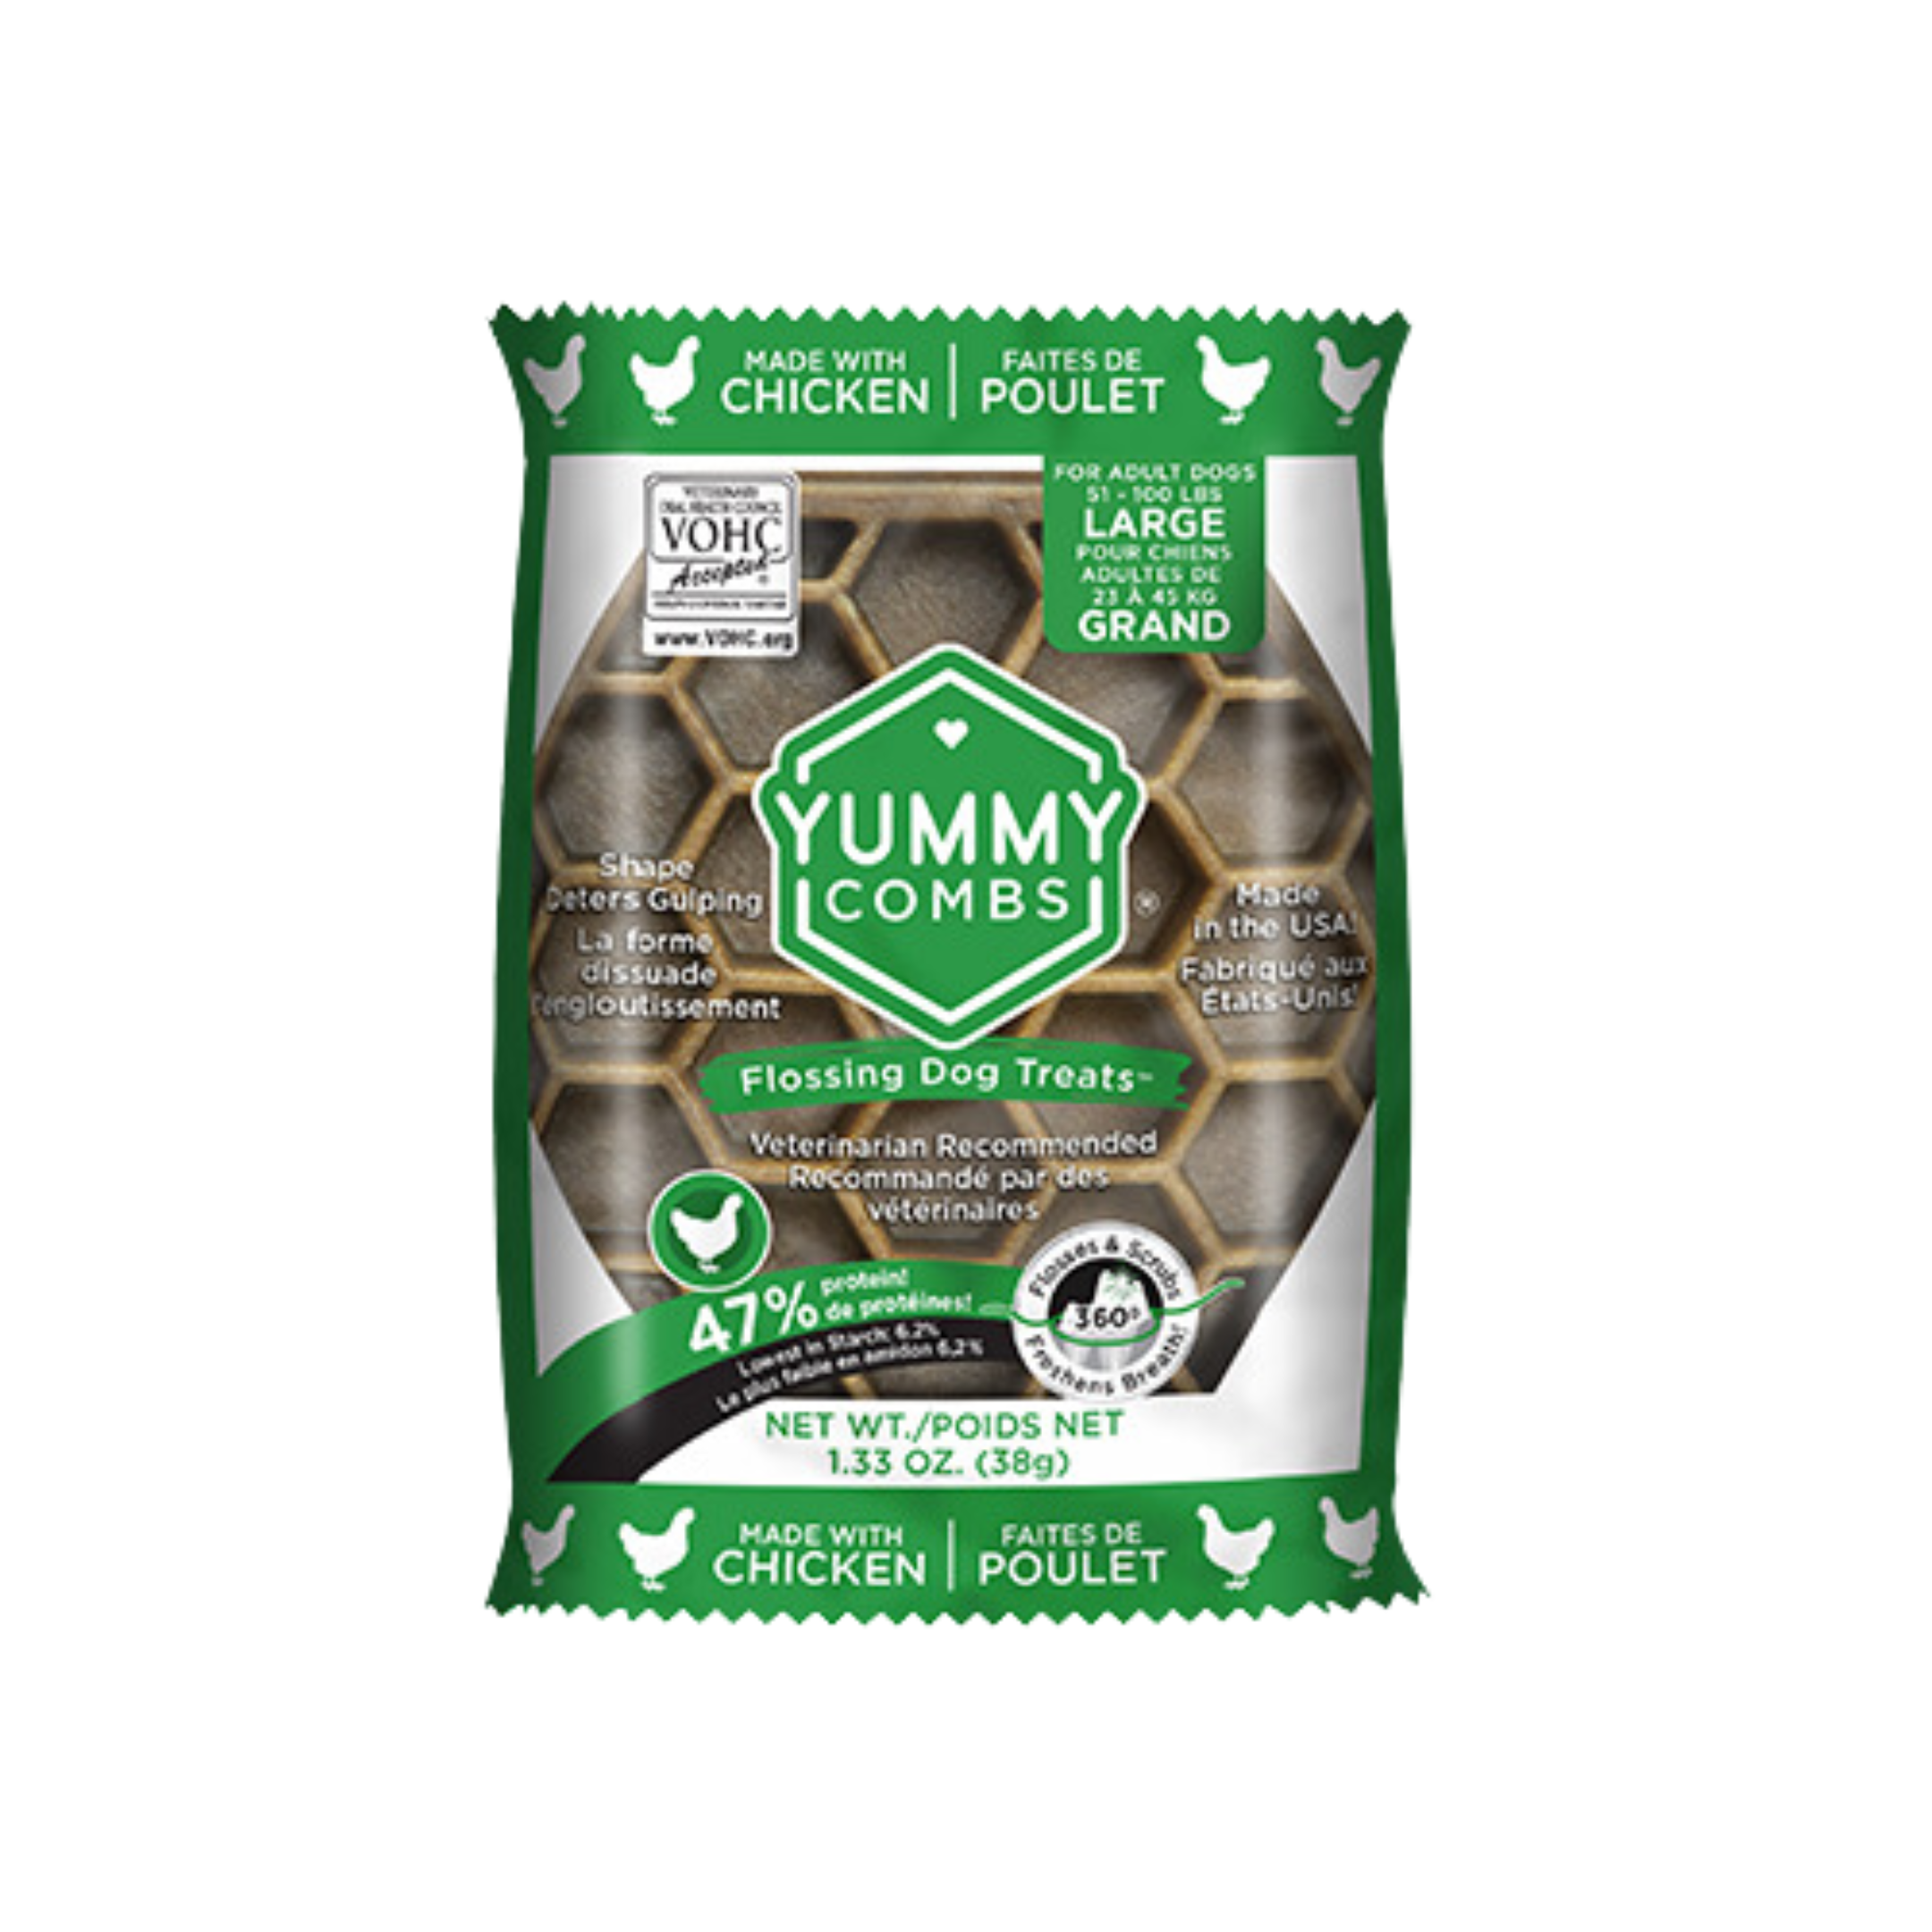 Yummy Combs Chicken Yummy Combs Flossing Dog Treat Samplers